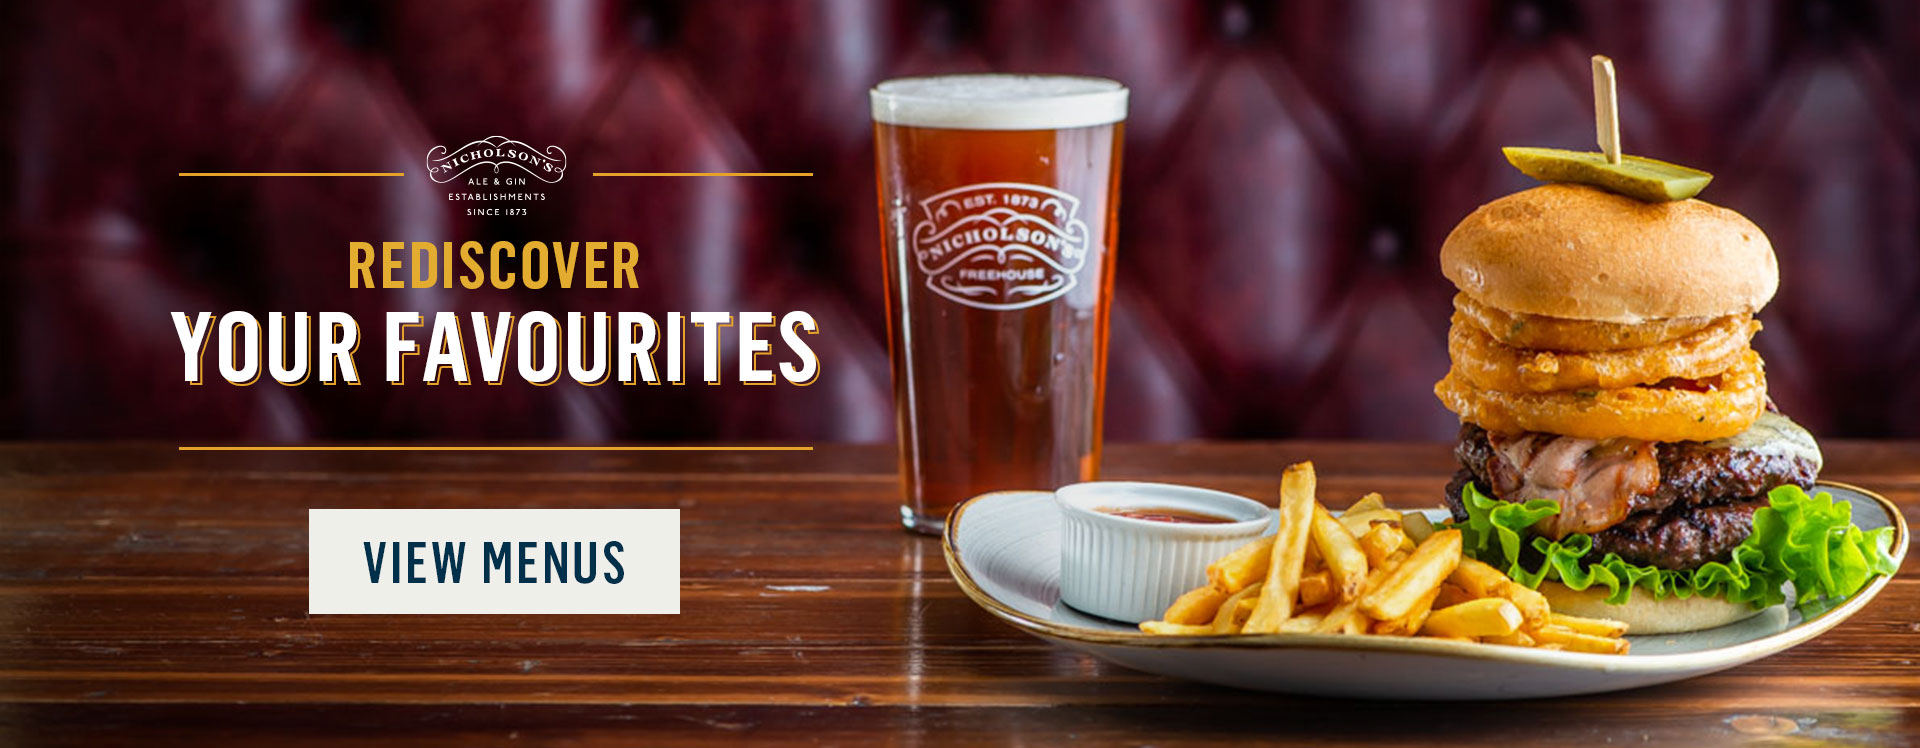 Rediscover your favourites at The Bear and Staff